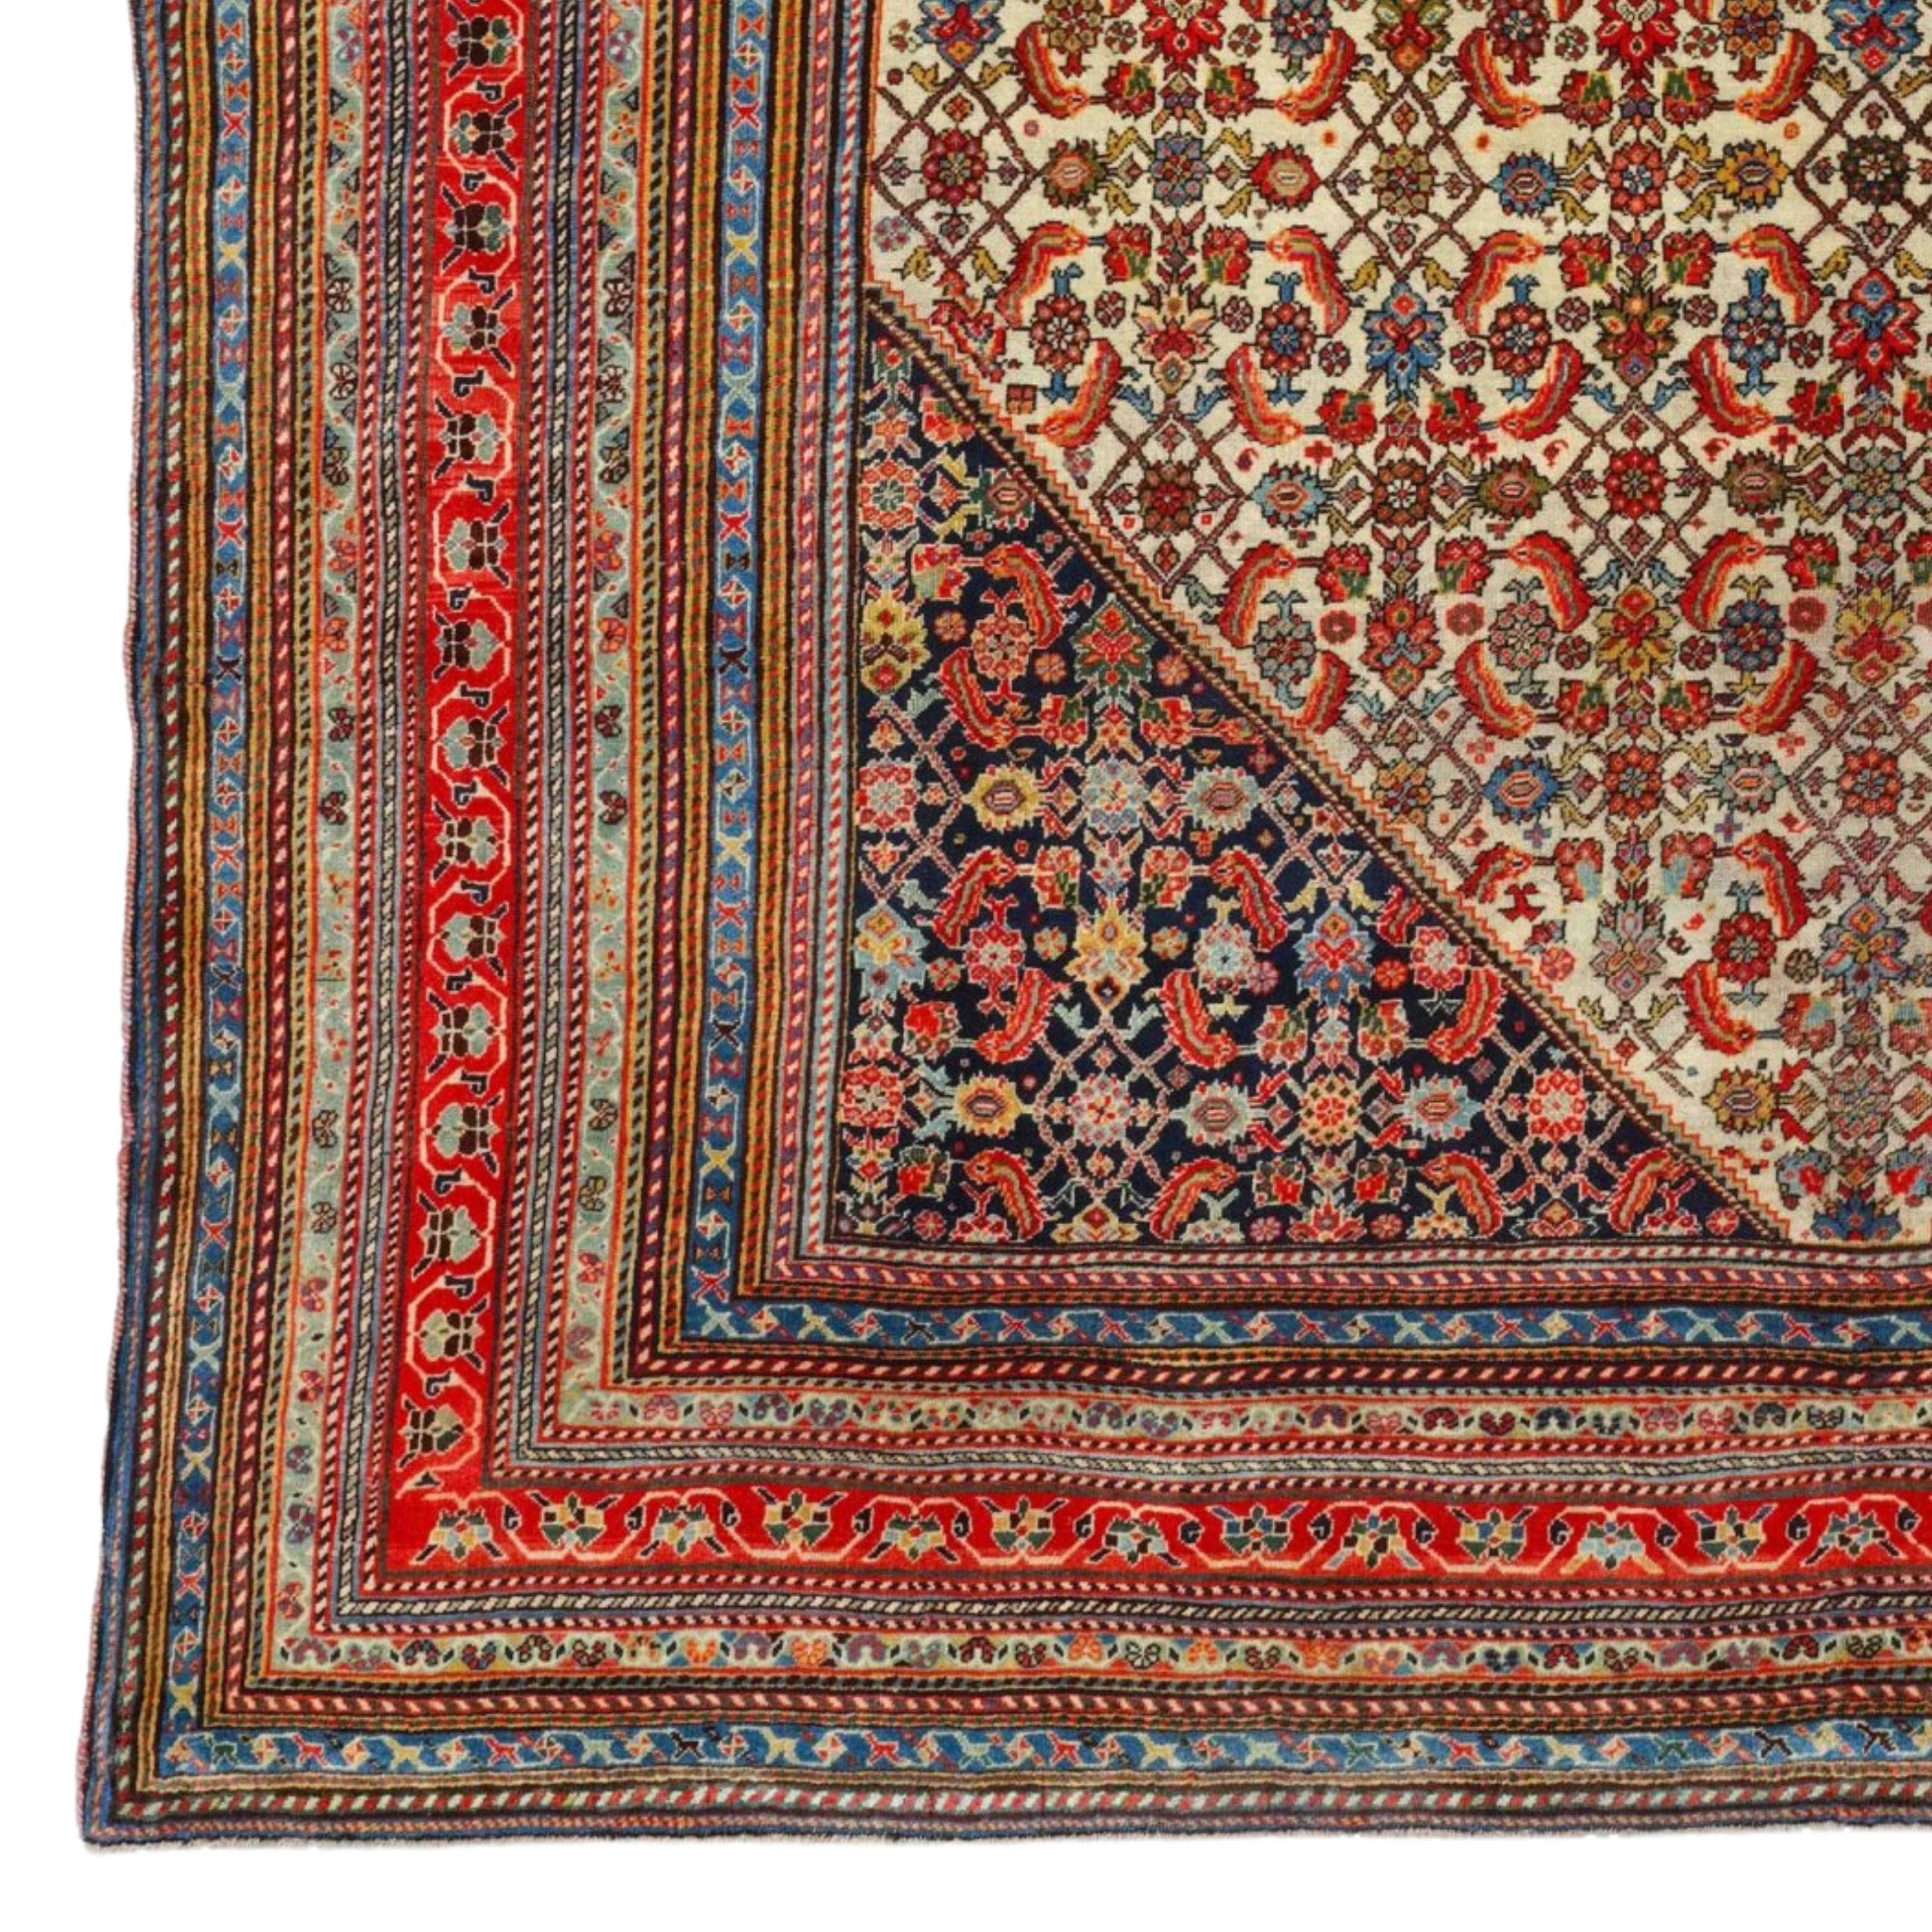 Antique Kaskhai Rug
Late 19th Century Silk Weft Kaskhai Rug in Perfect Condition
Size 193 x 245 cm (75,9x96,4 In)

This silk kaskhai carpet is a product of intricate craftsmanship and artistry, reflecting the rich cultural fabric of the Qashqai